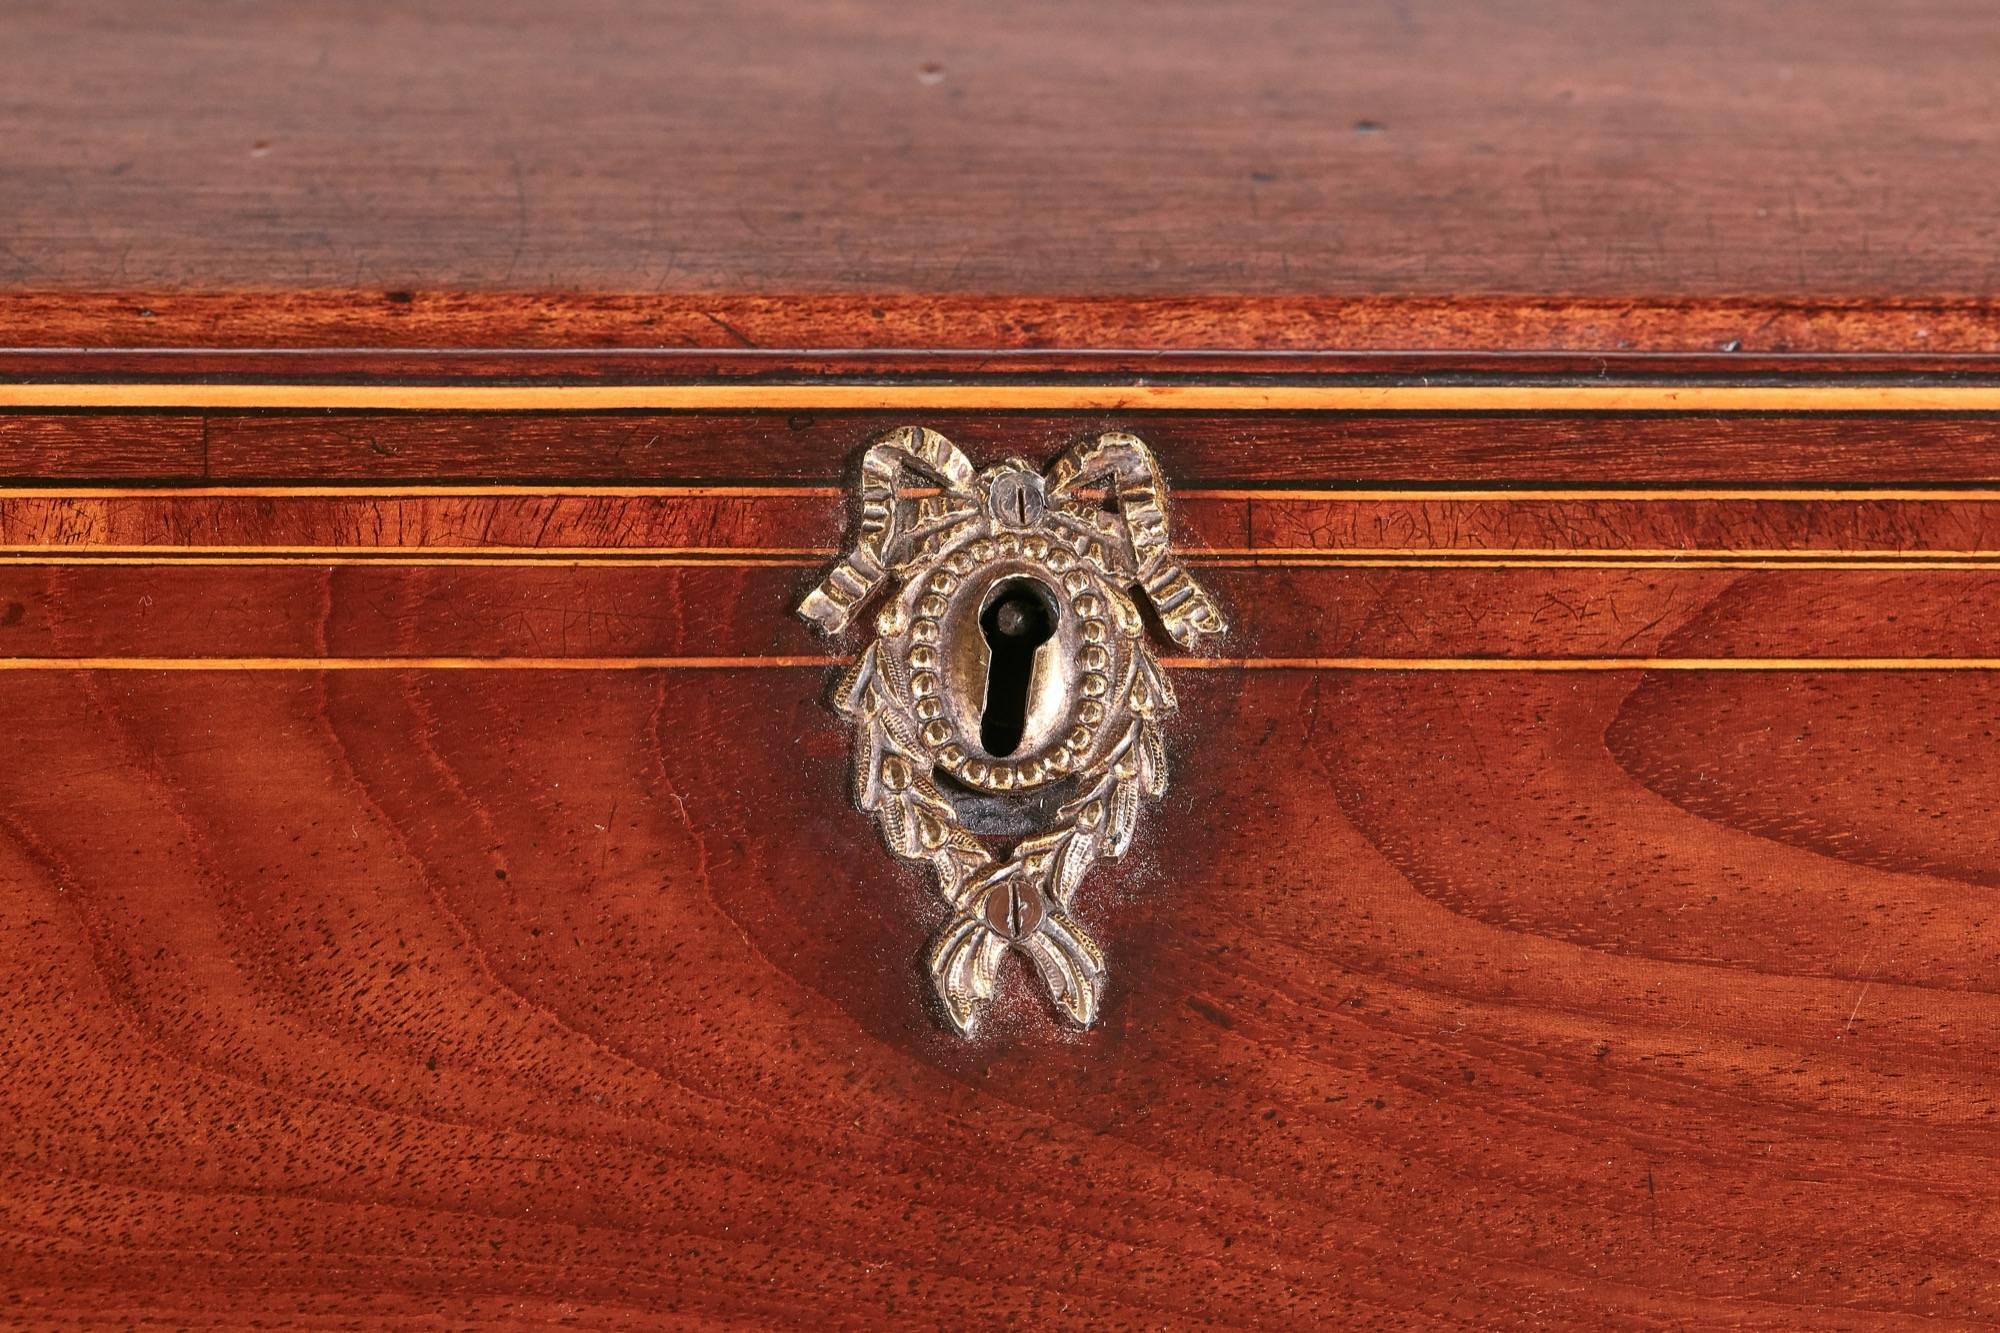 Outstanding quality George III inlaid mahogany bureau, having two short drawers and three long drawers with original brass handles, the inlaid mahogany fall opens to reveal a fantastic fitted satinwood interior, standing on original ogee shaped